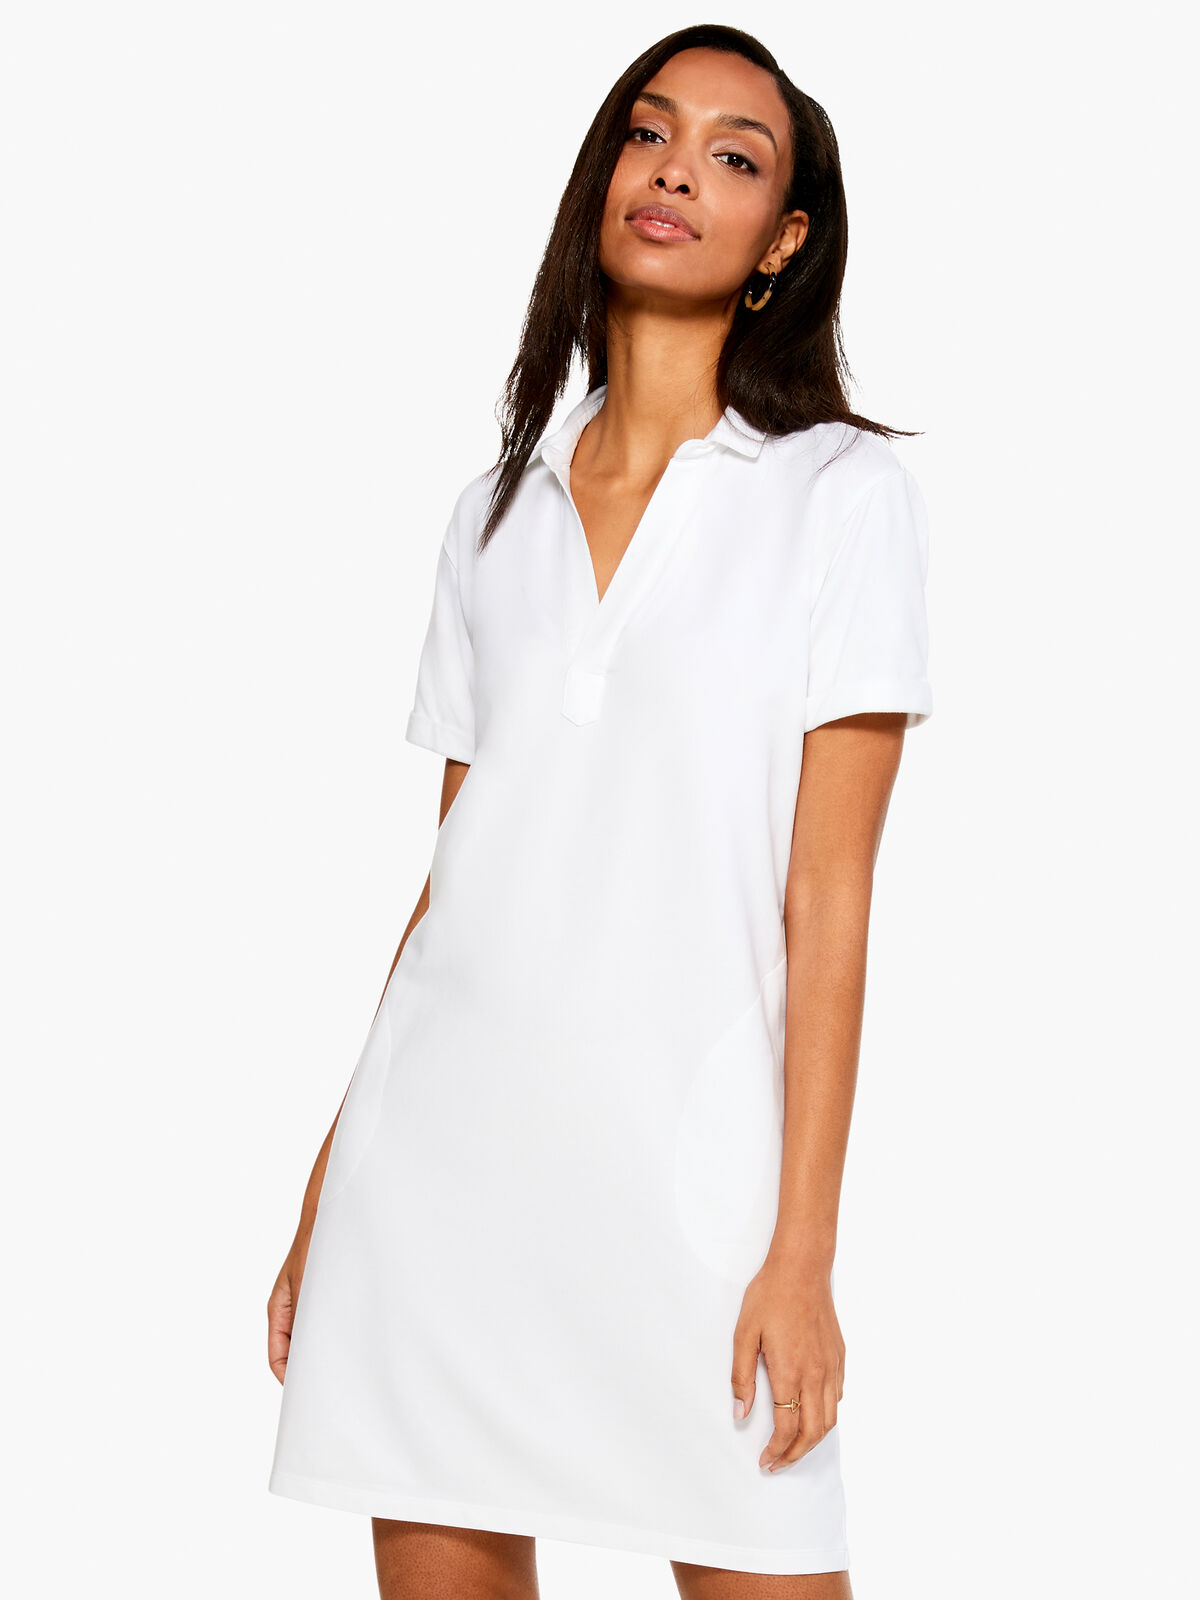 French Terry Pop Collar Dress